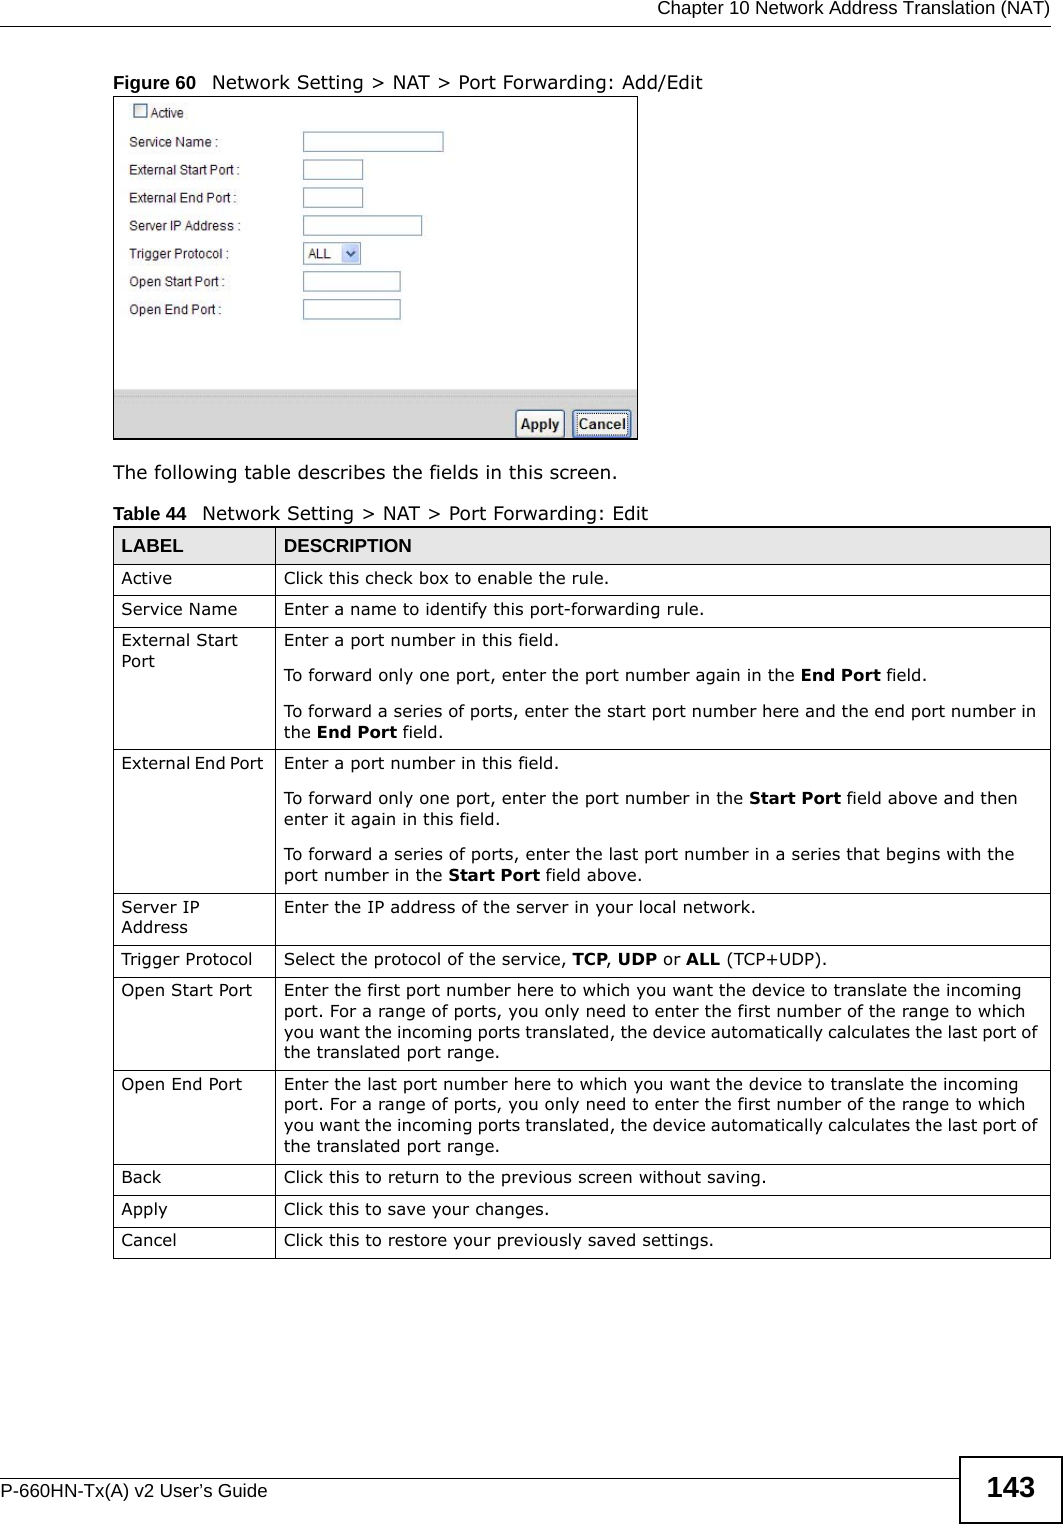  Chapter 10 Network Address Translation (NAT)P-660HN-Tx(A) v2 User’s Guide 143Figure 60   Network Setting &gt; NAT &gt; Port Forwarding: Add/Edit The following table describes the fields in this screen. Table 44   Network Setting &gt; NAT &gt; Port Forwarding: Edit LABEL DESCRIPTIONActive Click this check box to enable the rule.Service Name Enter a name to identify this port-forwarding rule.External Start Port Enter a port number in this field. To forward only one port, enter the port number again in the End Port field. To forward a series of ports, enter the start port number here and the end port number in the End Port field.External End Port  Enter a port number in this field. To forward only one port, enter the port number in the Start Port field above and then enter it again in this field. To forward a series of ports, enter the last port number in a series that begins with the port number in the Start Port field above.Server IP AddressEnter the IP address of the server in your local network.Trigger Protocol Select the protocol of the service, TCP, UDP or ALL (TCP+UDP).Open Start Port Enter the first port number here to which you want the device to translate the incoming port. For a range of ports, you only need to enter the first number of the range to which you want the incoming ports translated, the device automatically calculates the last port of the translated port range.Open End Port Enter the last port number here to which you want the device to translate the incoming port. For a range of ports, you only need to enter the first number of the range to which you want the incoming ports translated, the device automatically calculates the last port of the translated port range.Back Click this to return to the previous screen without saving.Apply Click this to save your changes.Cancel Click this to restore your previously saved settings.